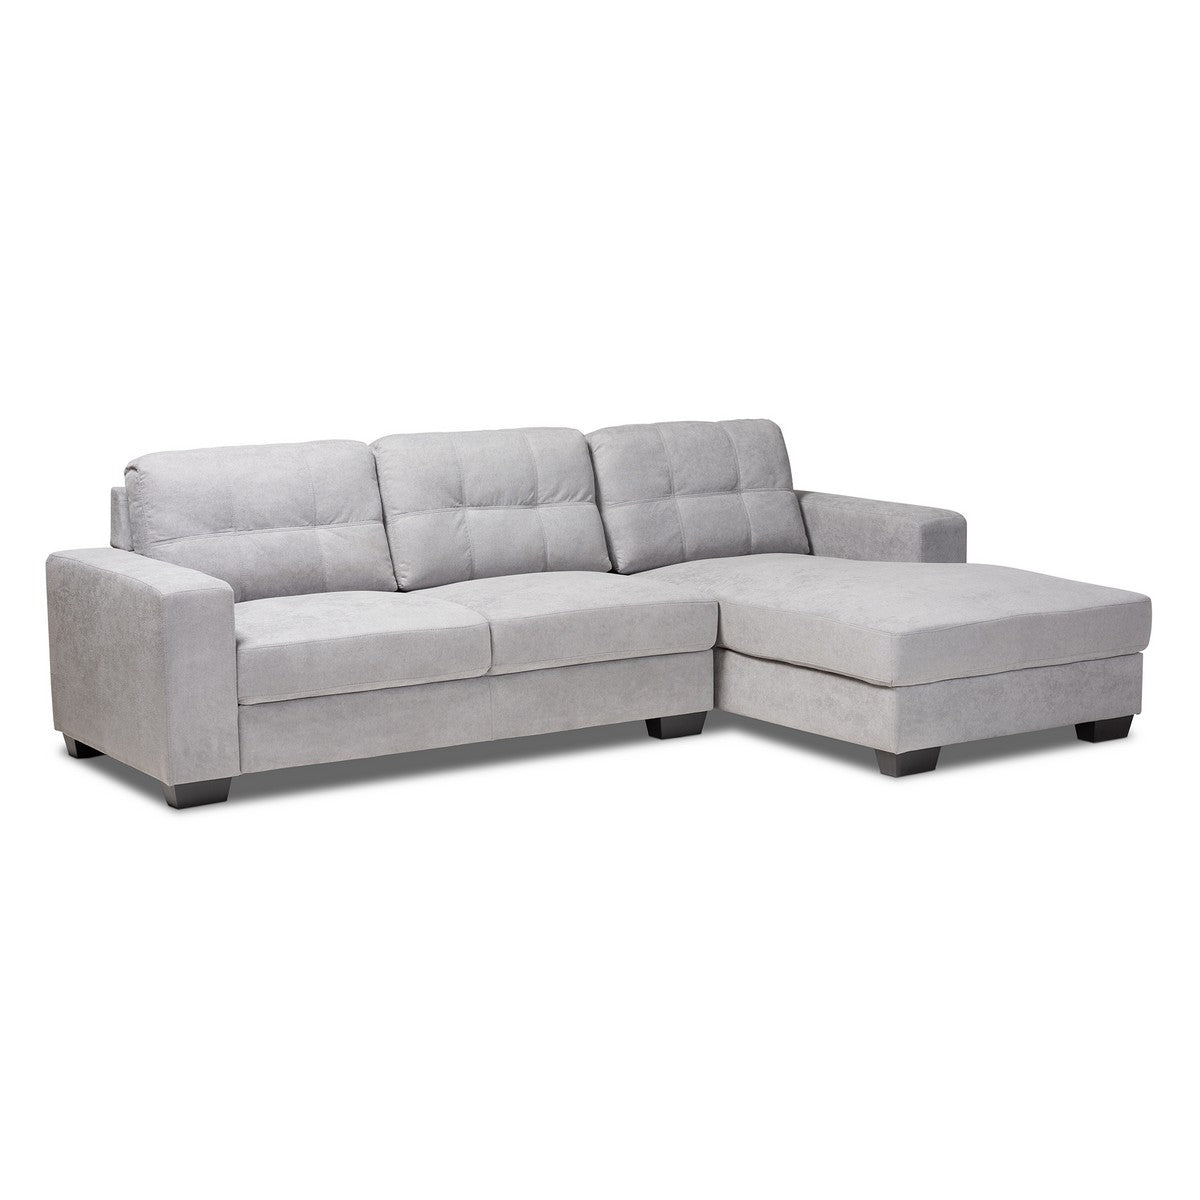 Baxton Studio Langley Modern and Contemporary Light Grey Fabric Upholstered Sectional Sofa with Right Facing Chaise Baxton Studio-sectionals-Minimal And Modern - 1